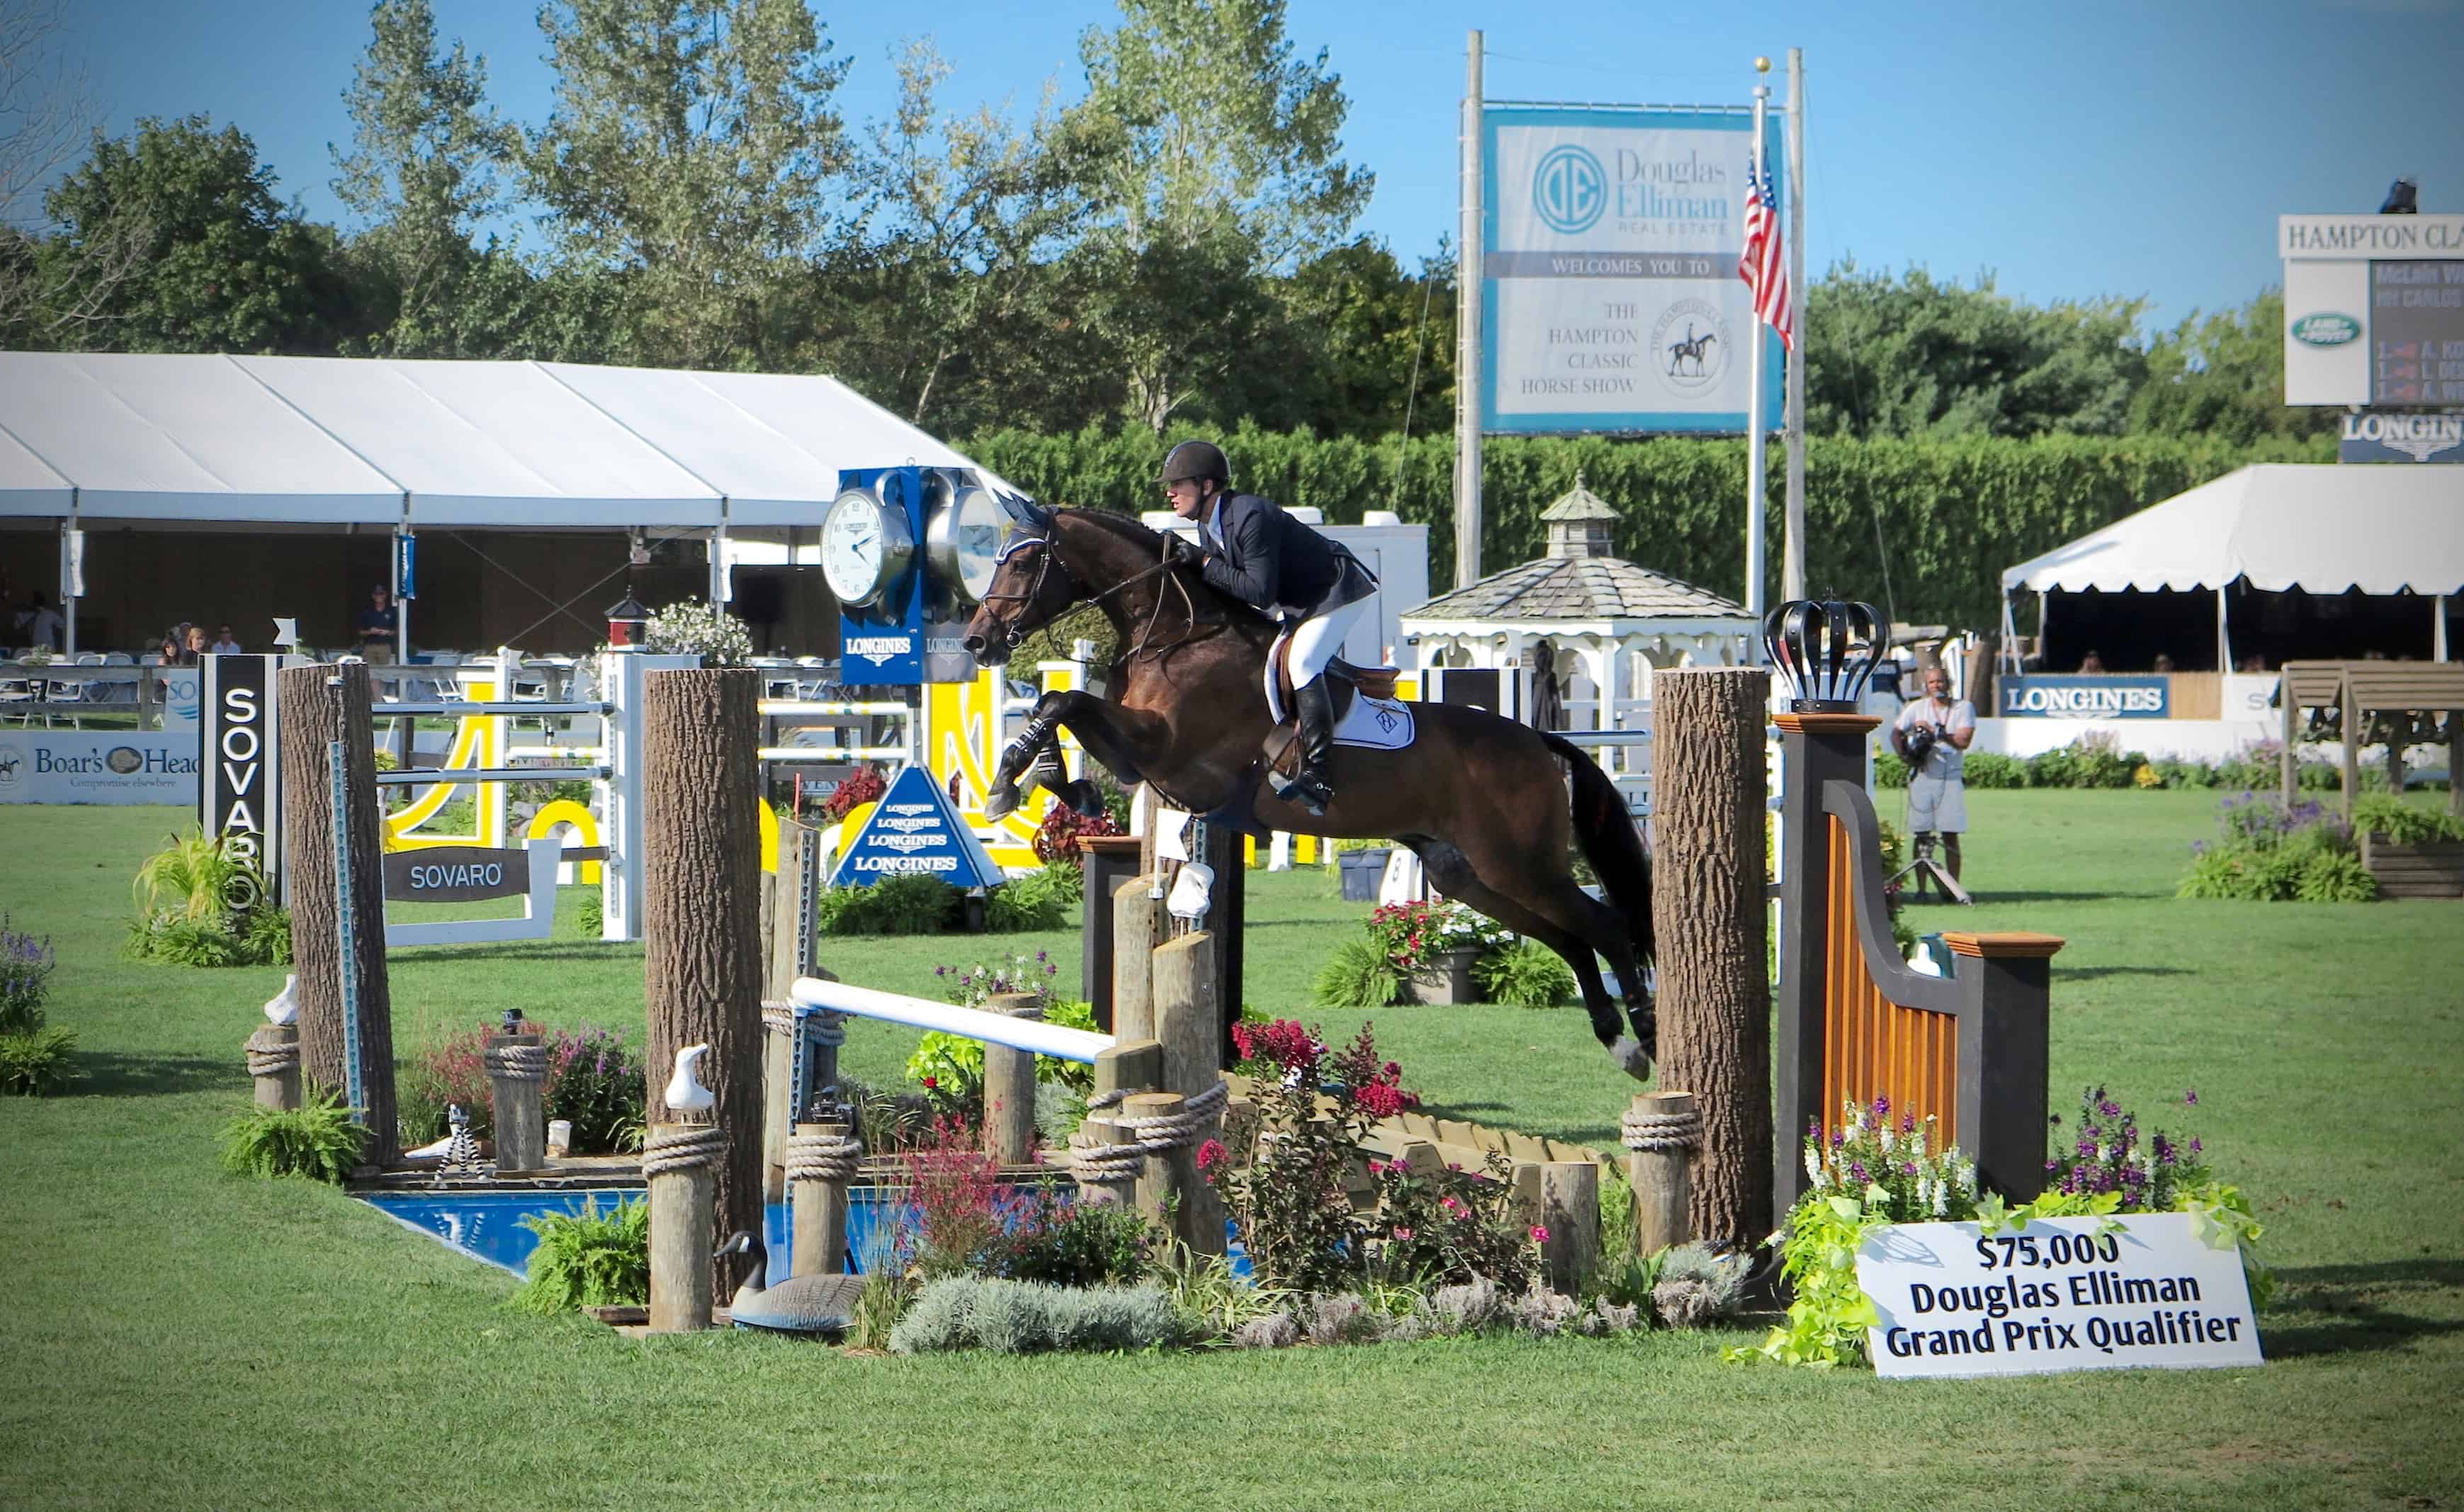 Ward Wins $75,000 Douglas Elliman Grand Prix Qualifier, presented by Longines, for the Second Consecutive Year at Hampton Classic